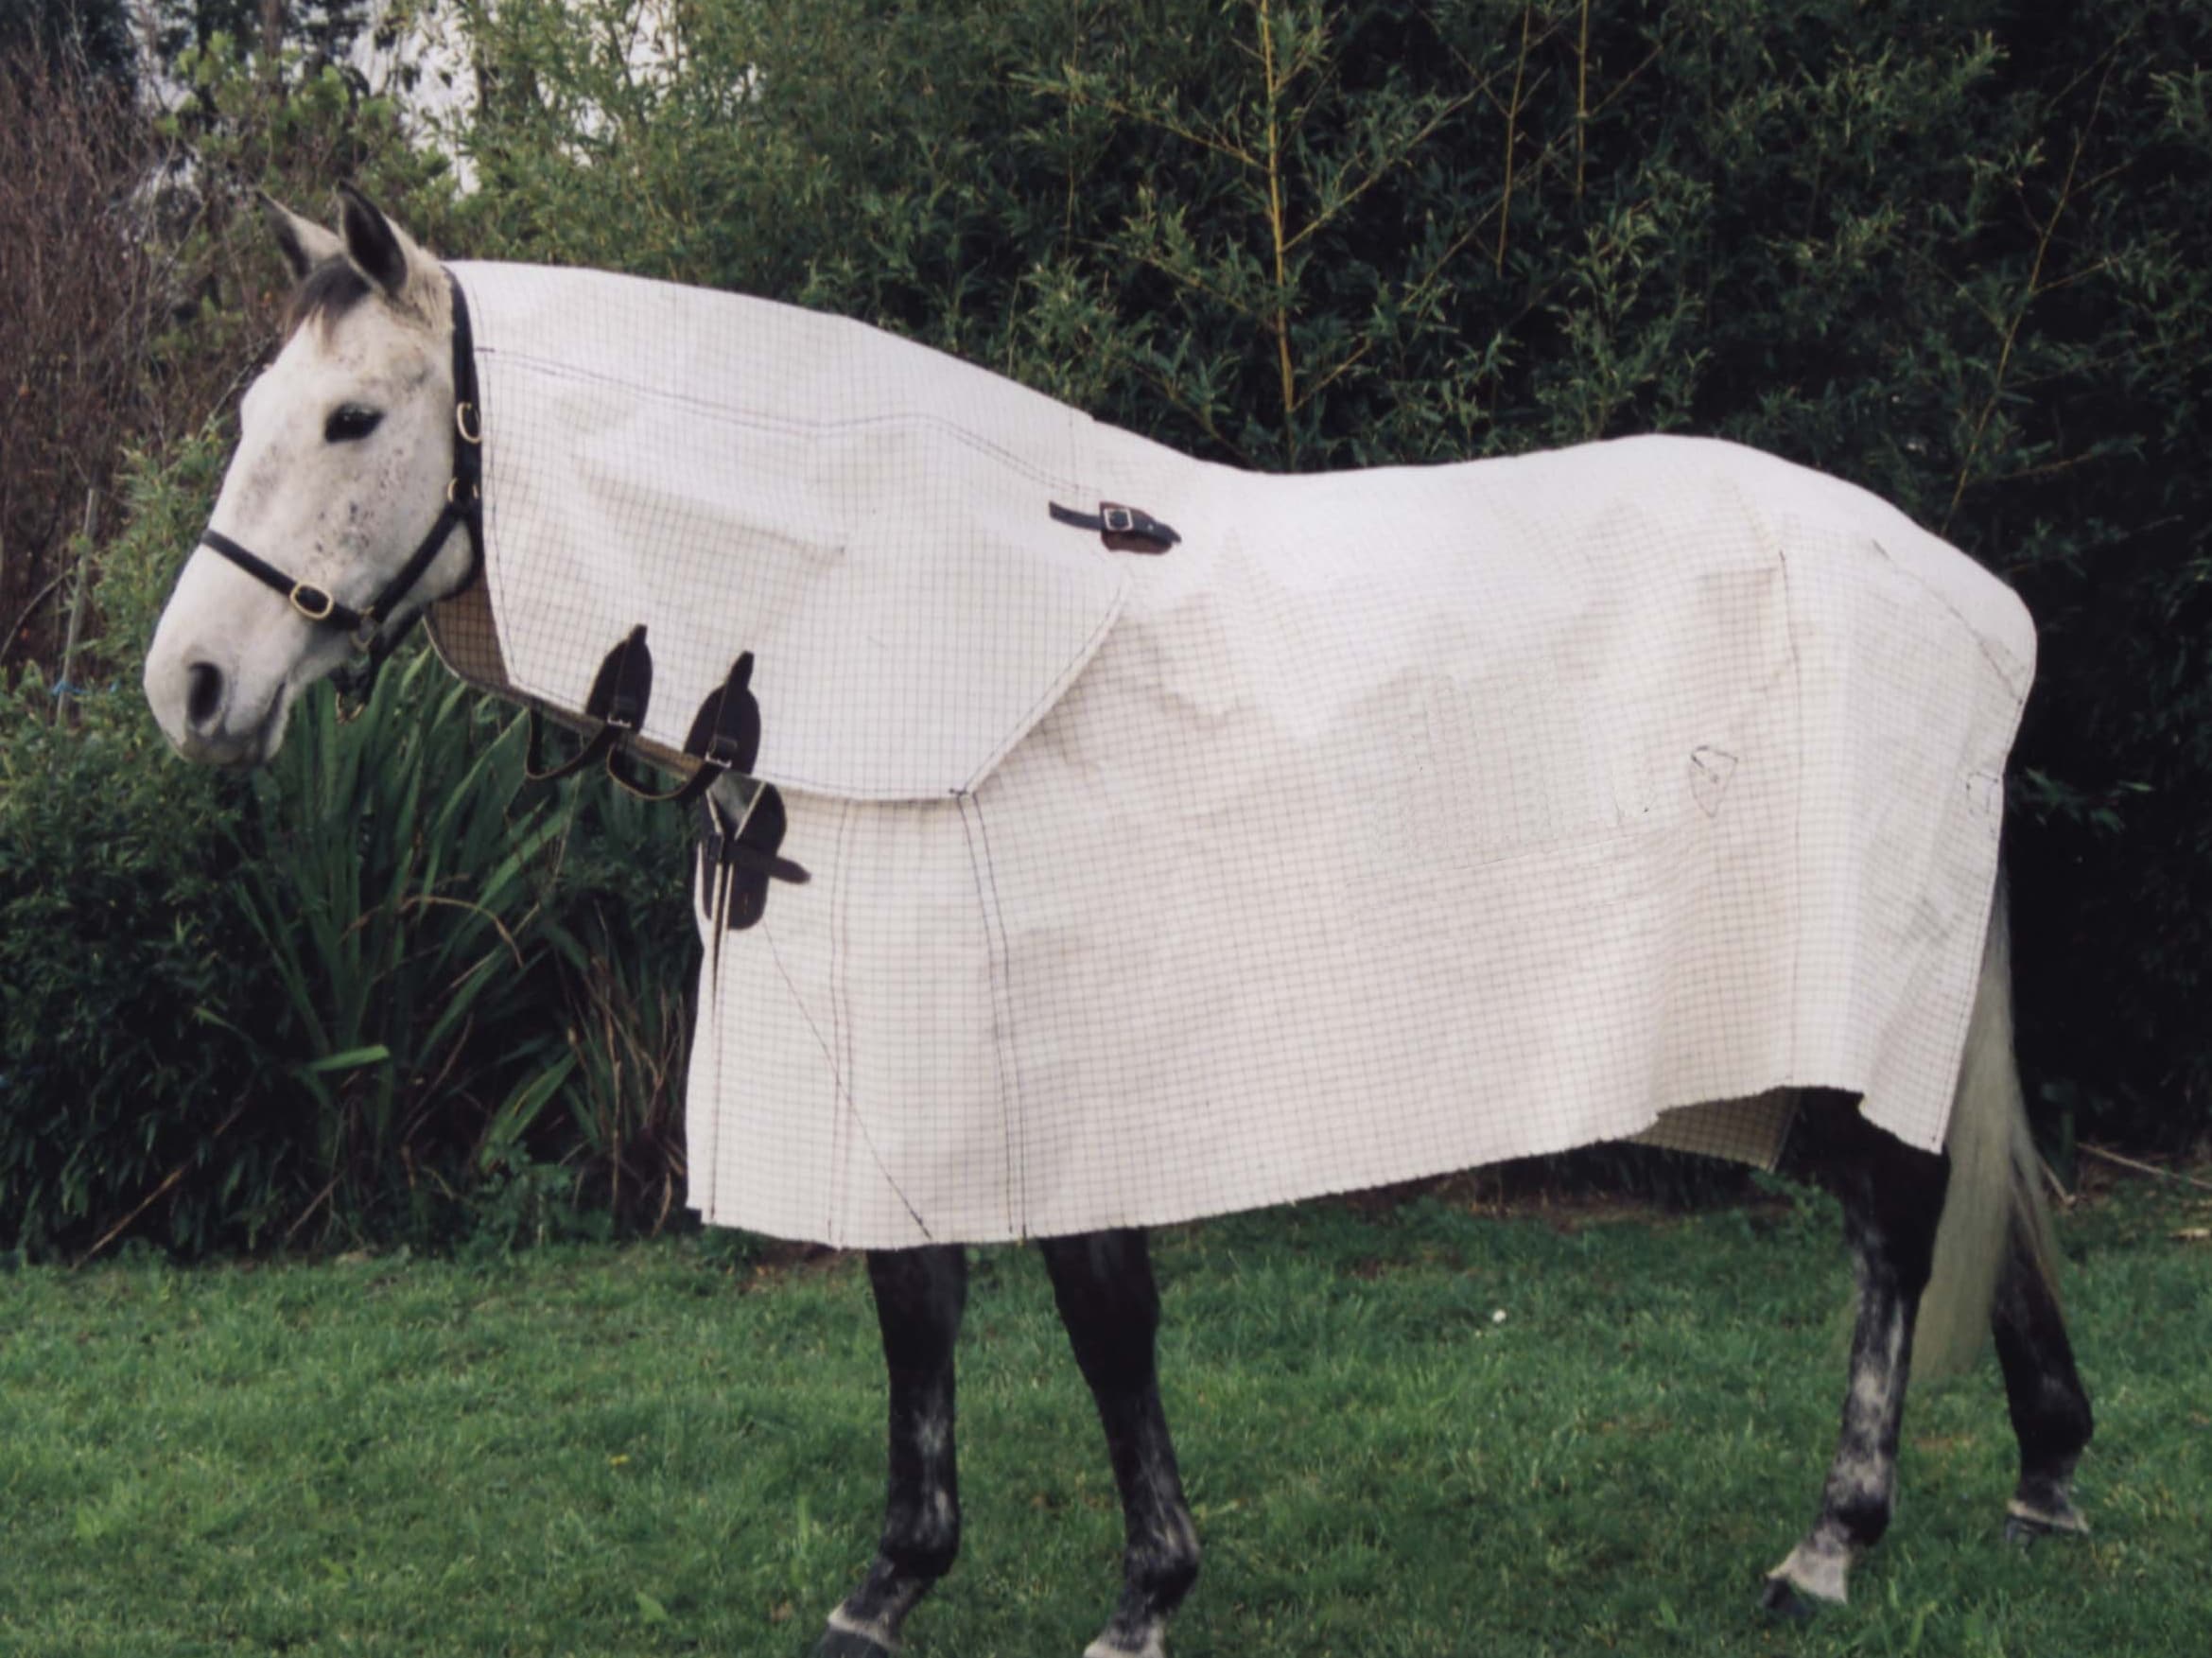 A horse in a field wearing a Robertson Canvas summer rug or sheet